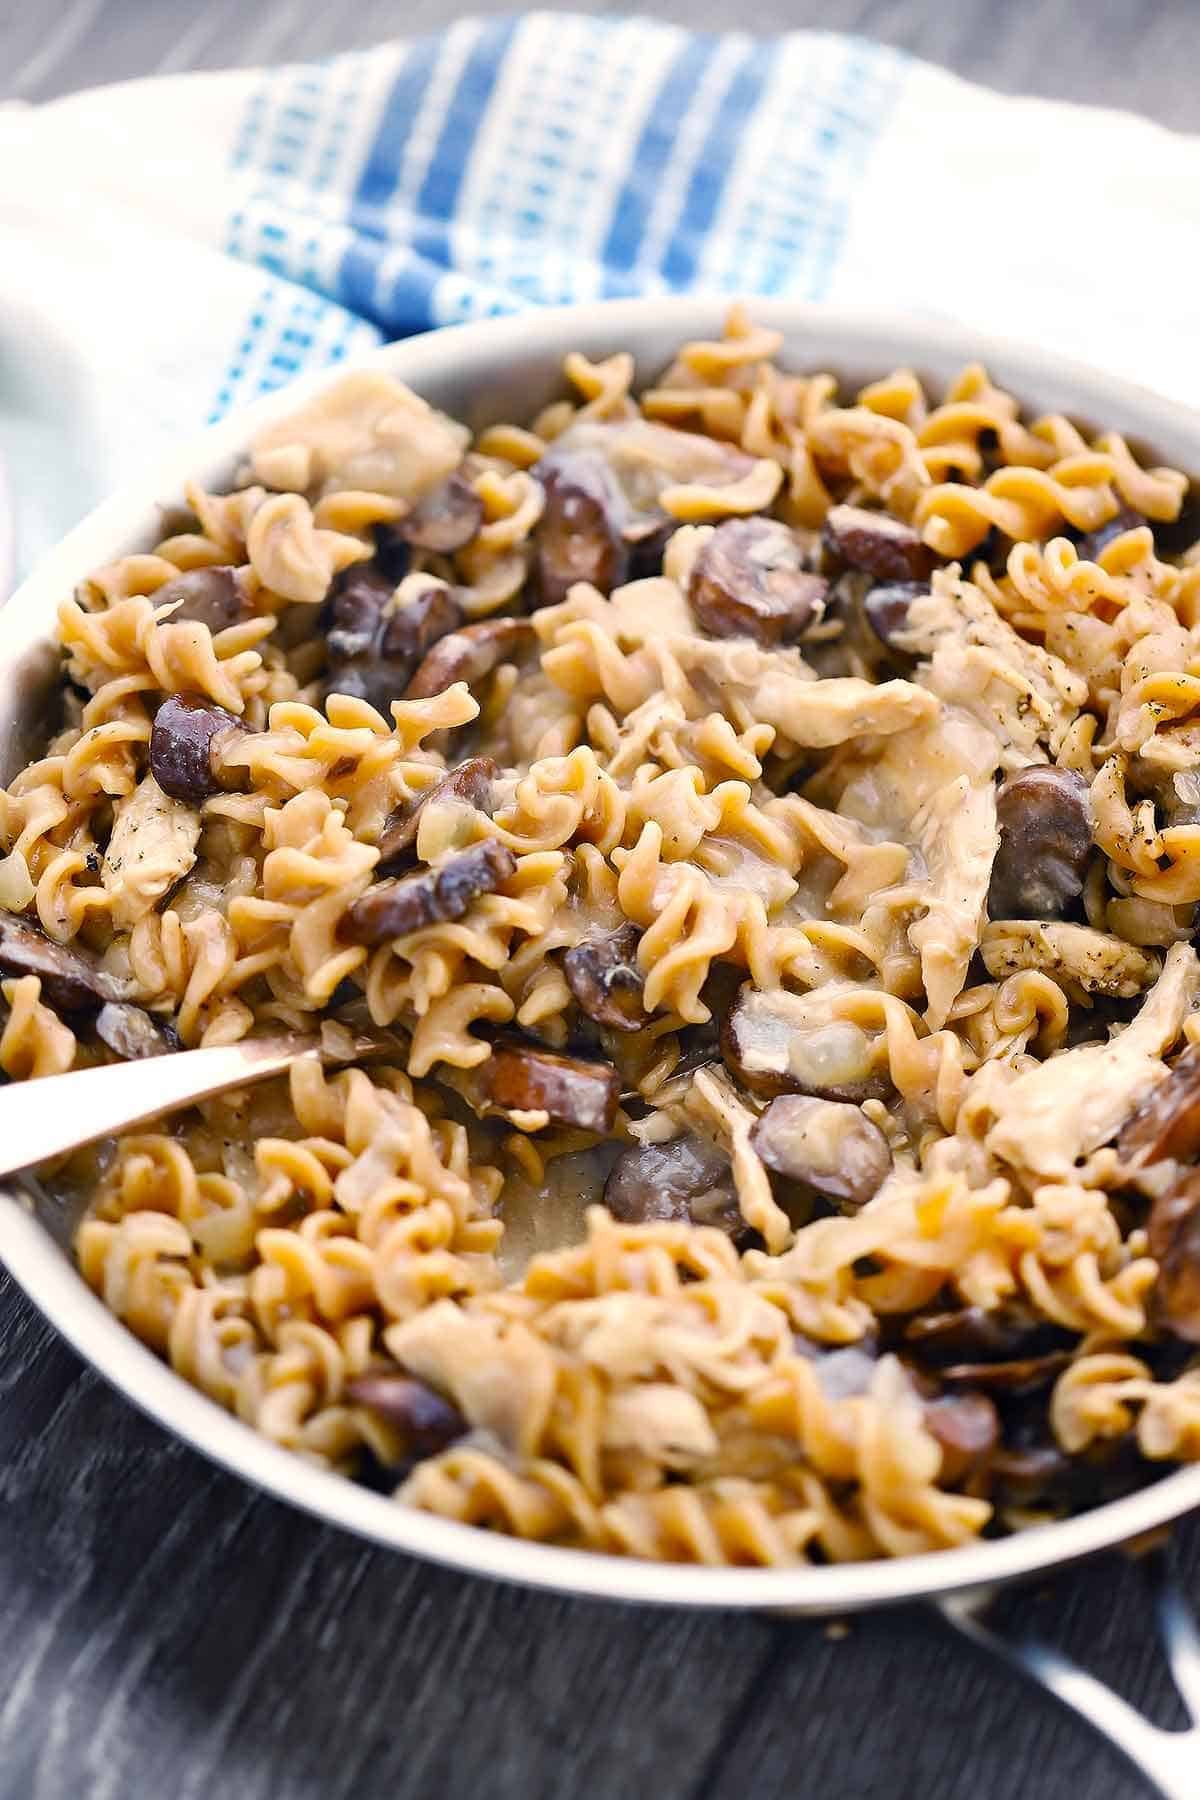 These Hearty & Healthy Mushroom Recipes Are So Satisfying